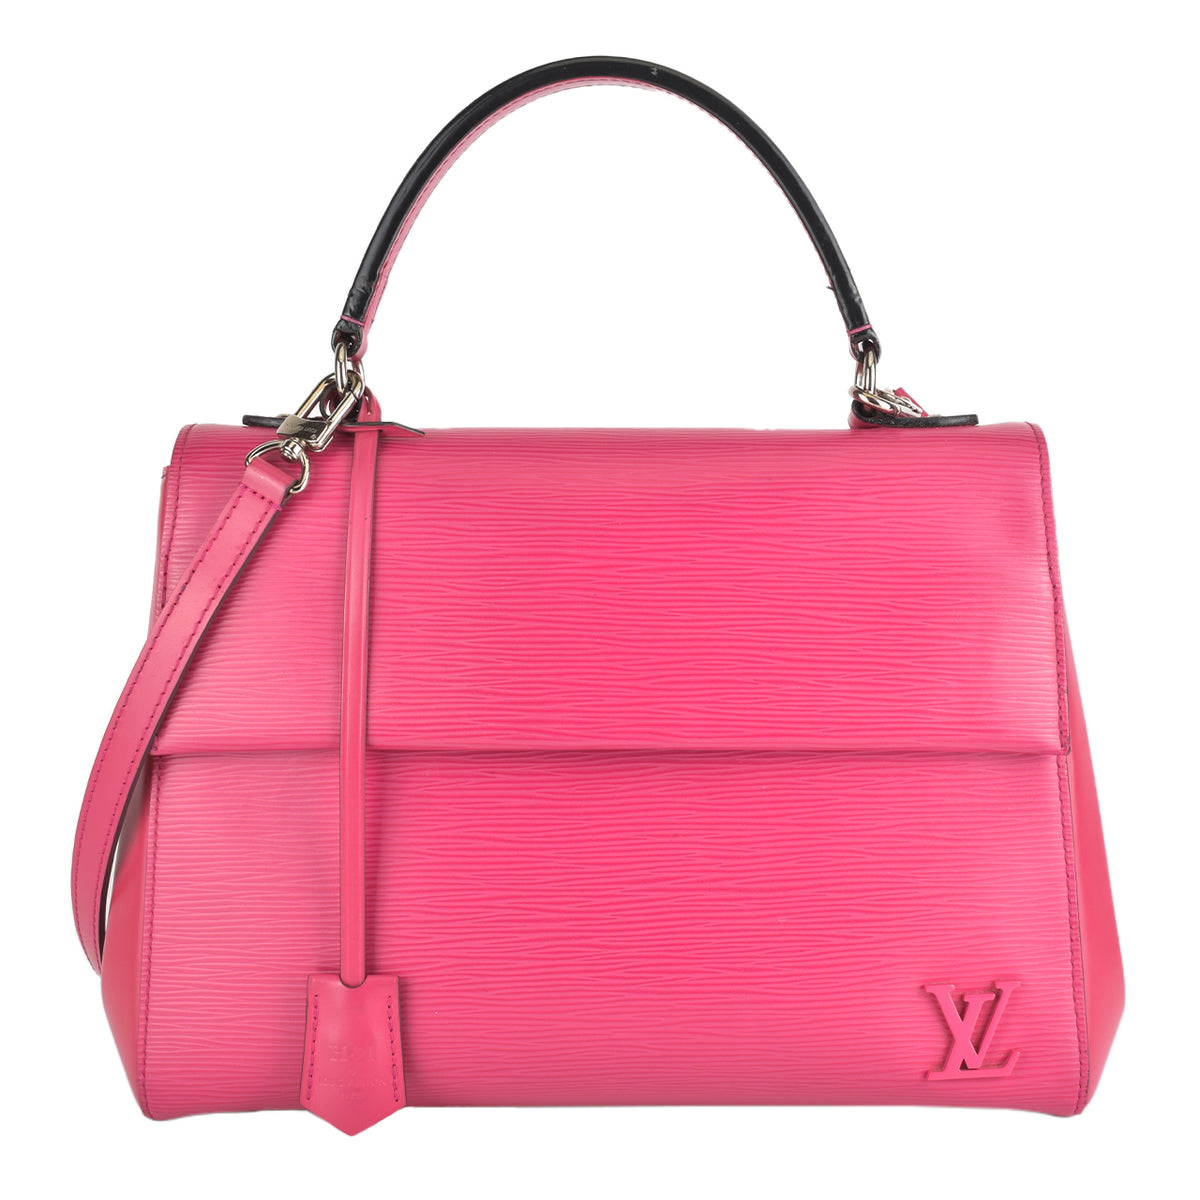 Louis Vuitton - Glampot  Authentic Preloved and Brand New Bags